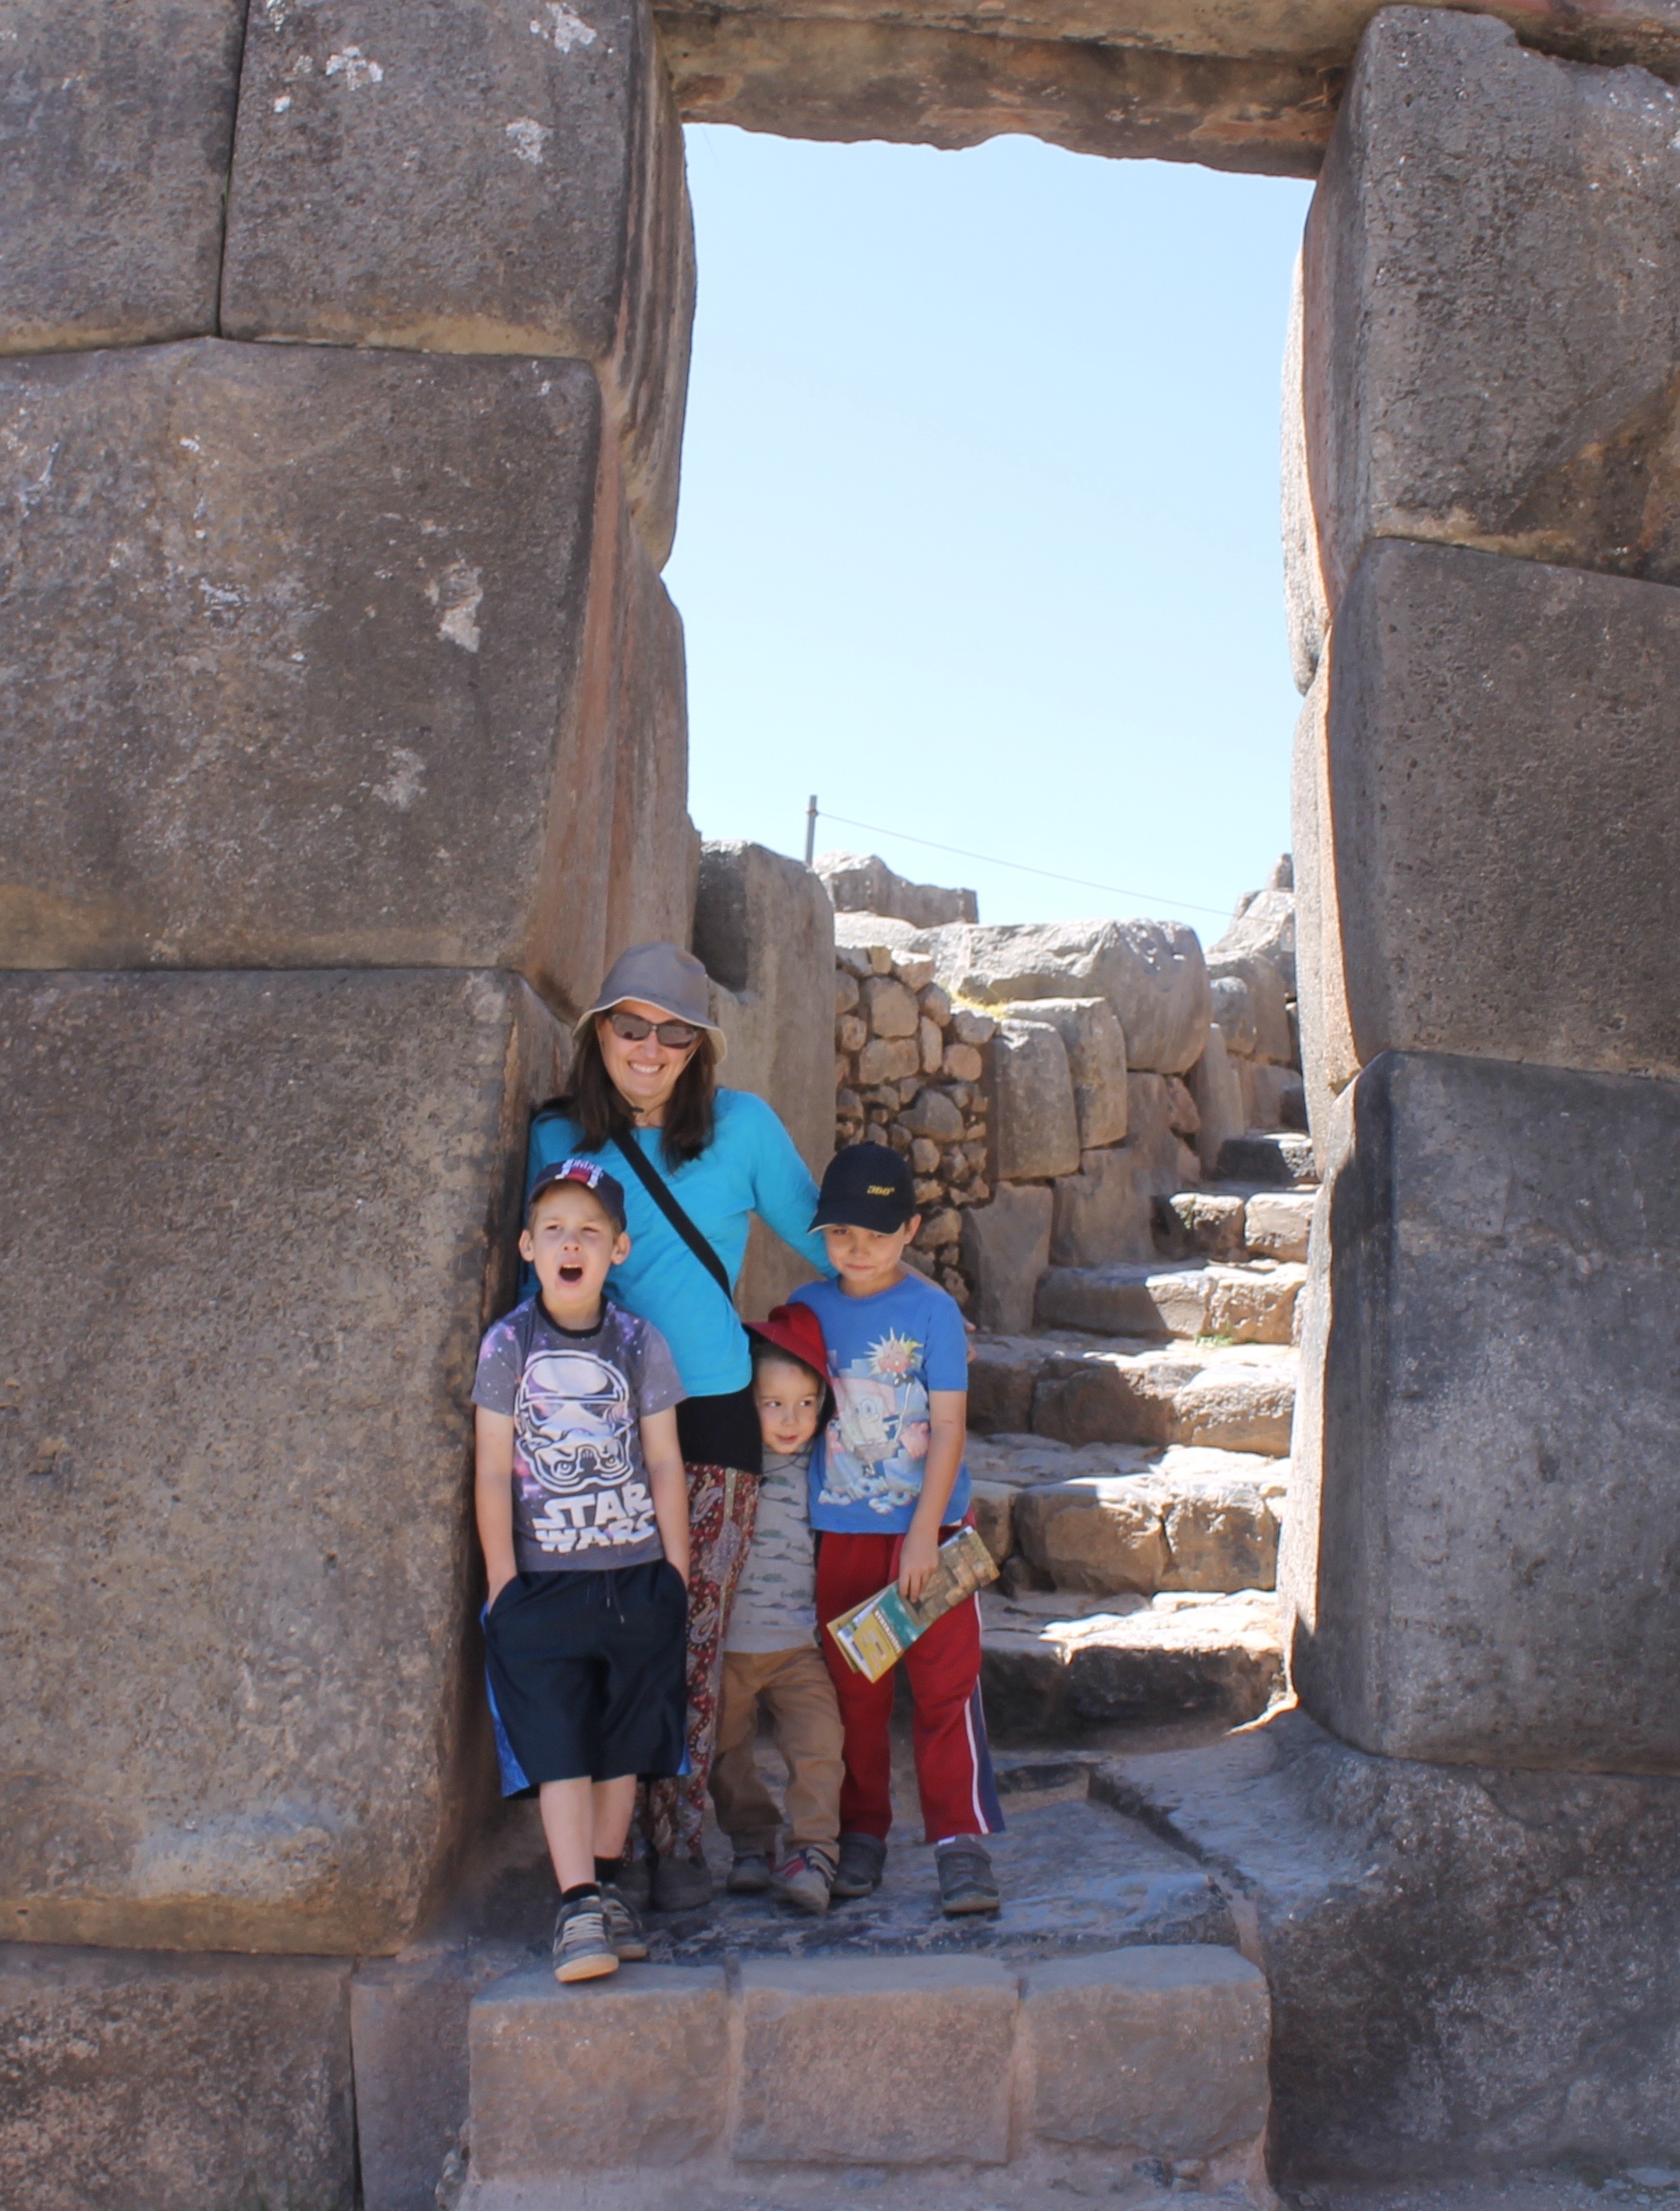  You can see how HUGE this doorway actually is now we are standing in it. &nbsp;And yes, my boys don't always appear smiley in photos!&nbsp; 